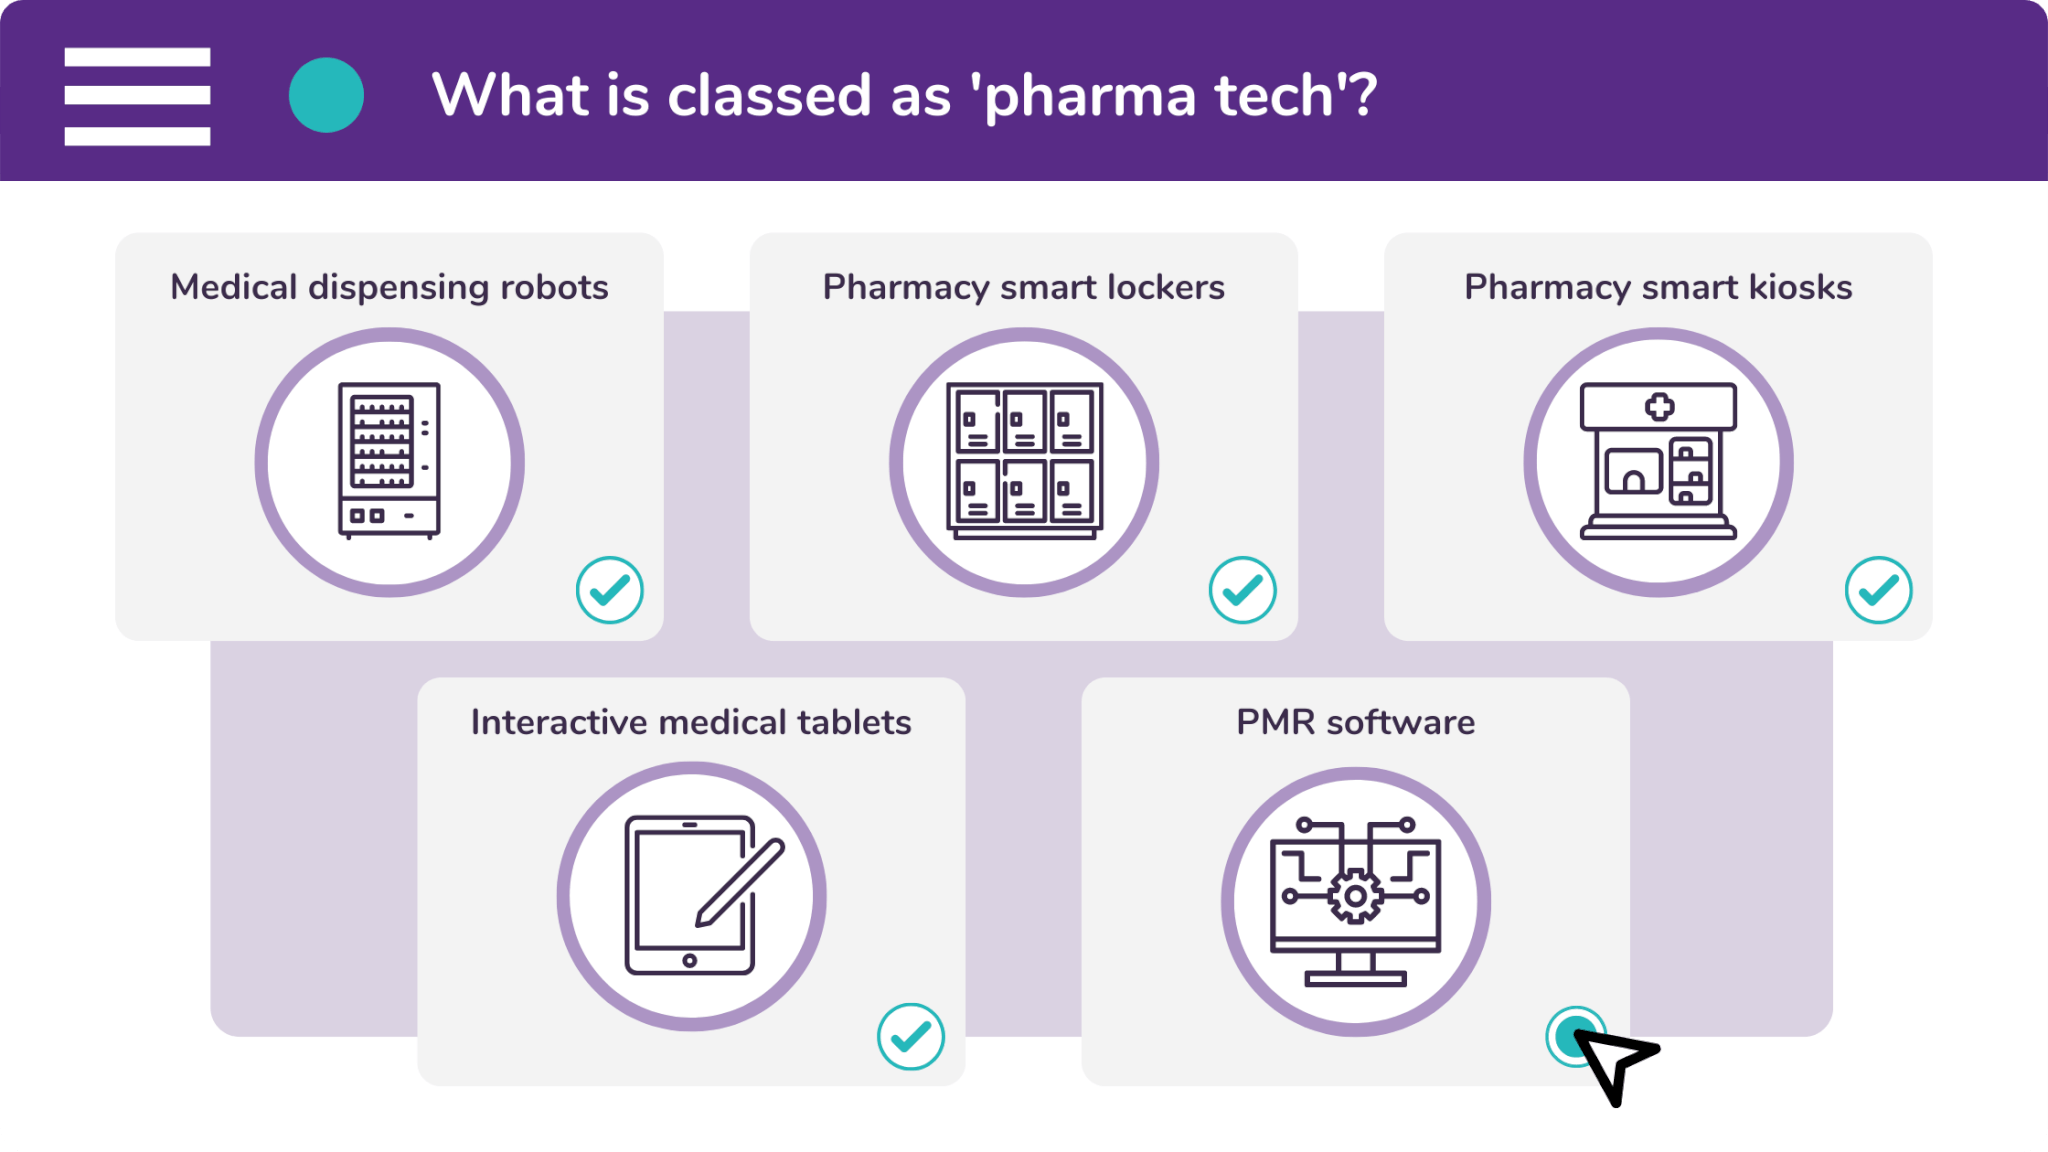 At Synergi Finance, we can offer a flexible payment solution on several different types of pharmaceutical technology.